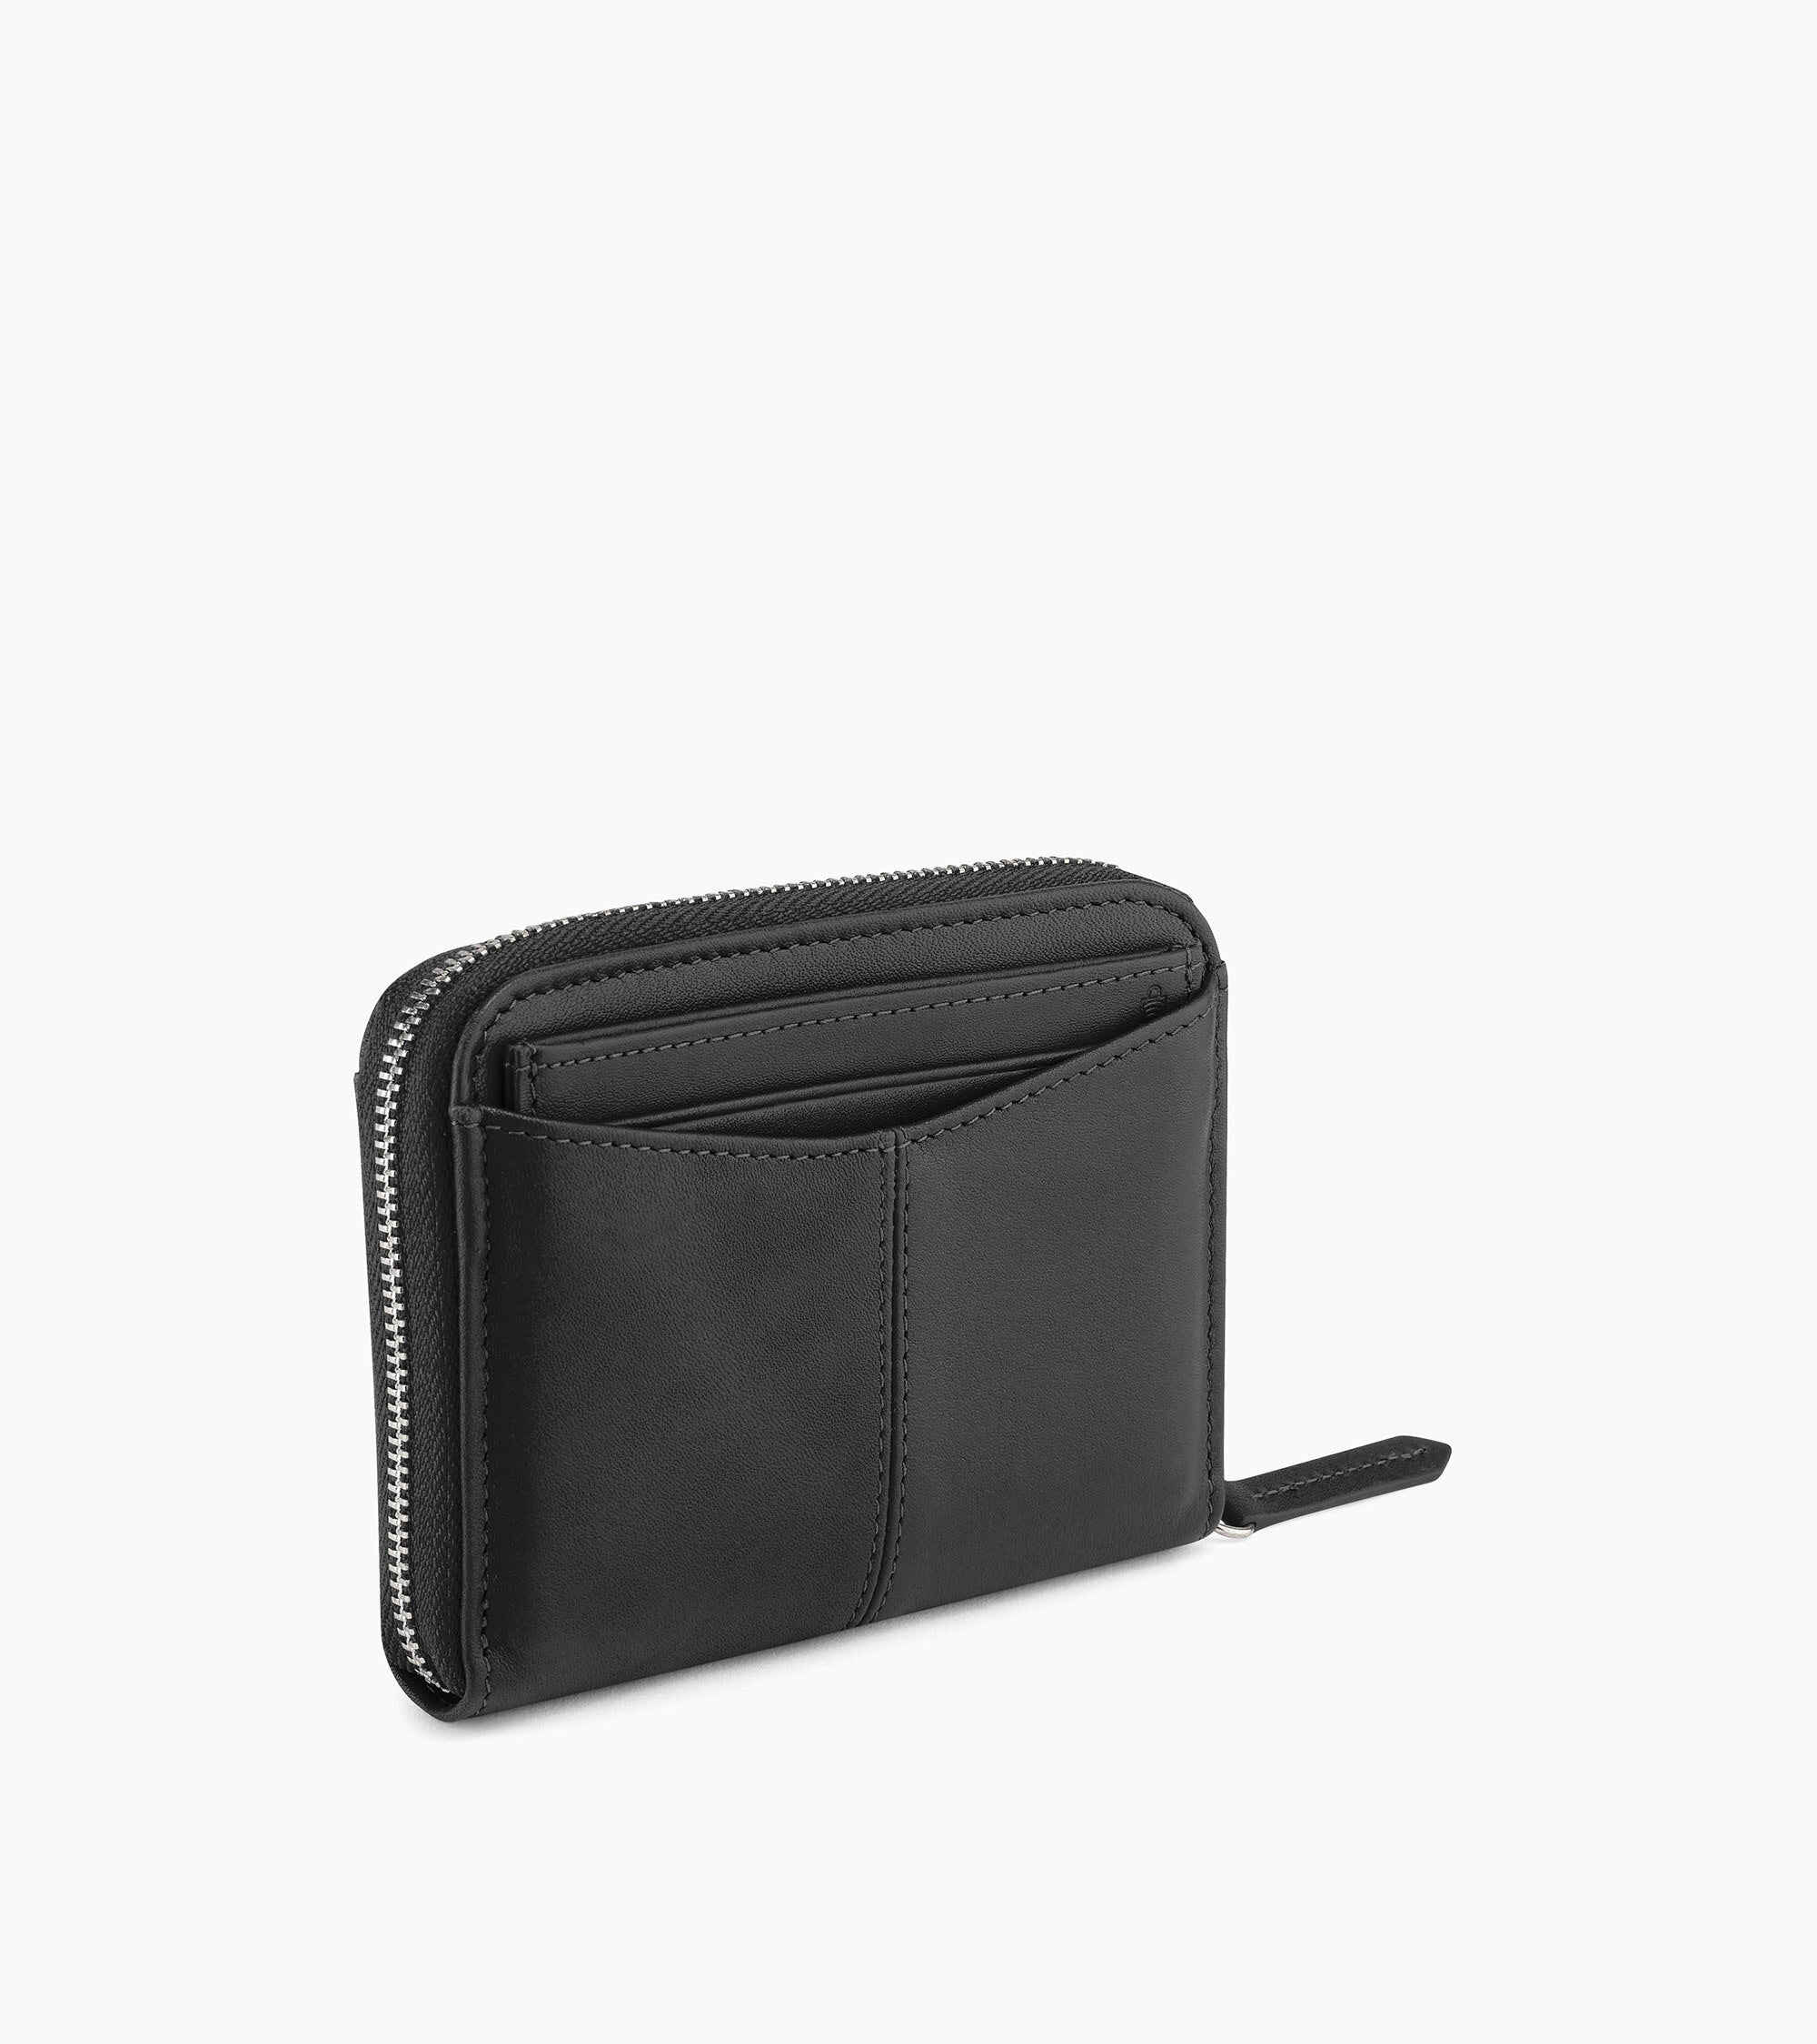 Charlotte zipped coin purse with removable card compartments in smooth leather